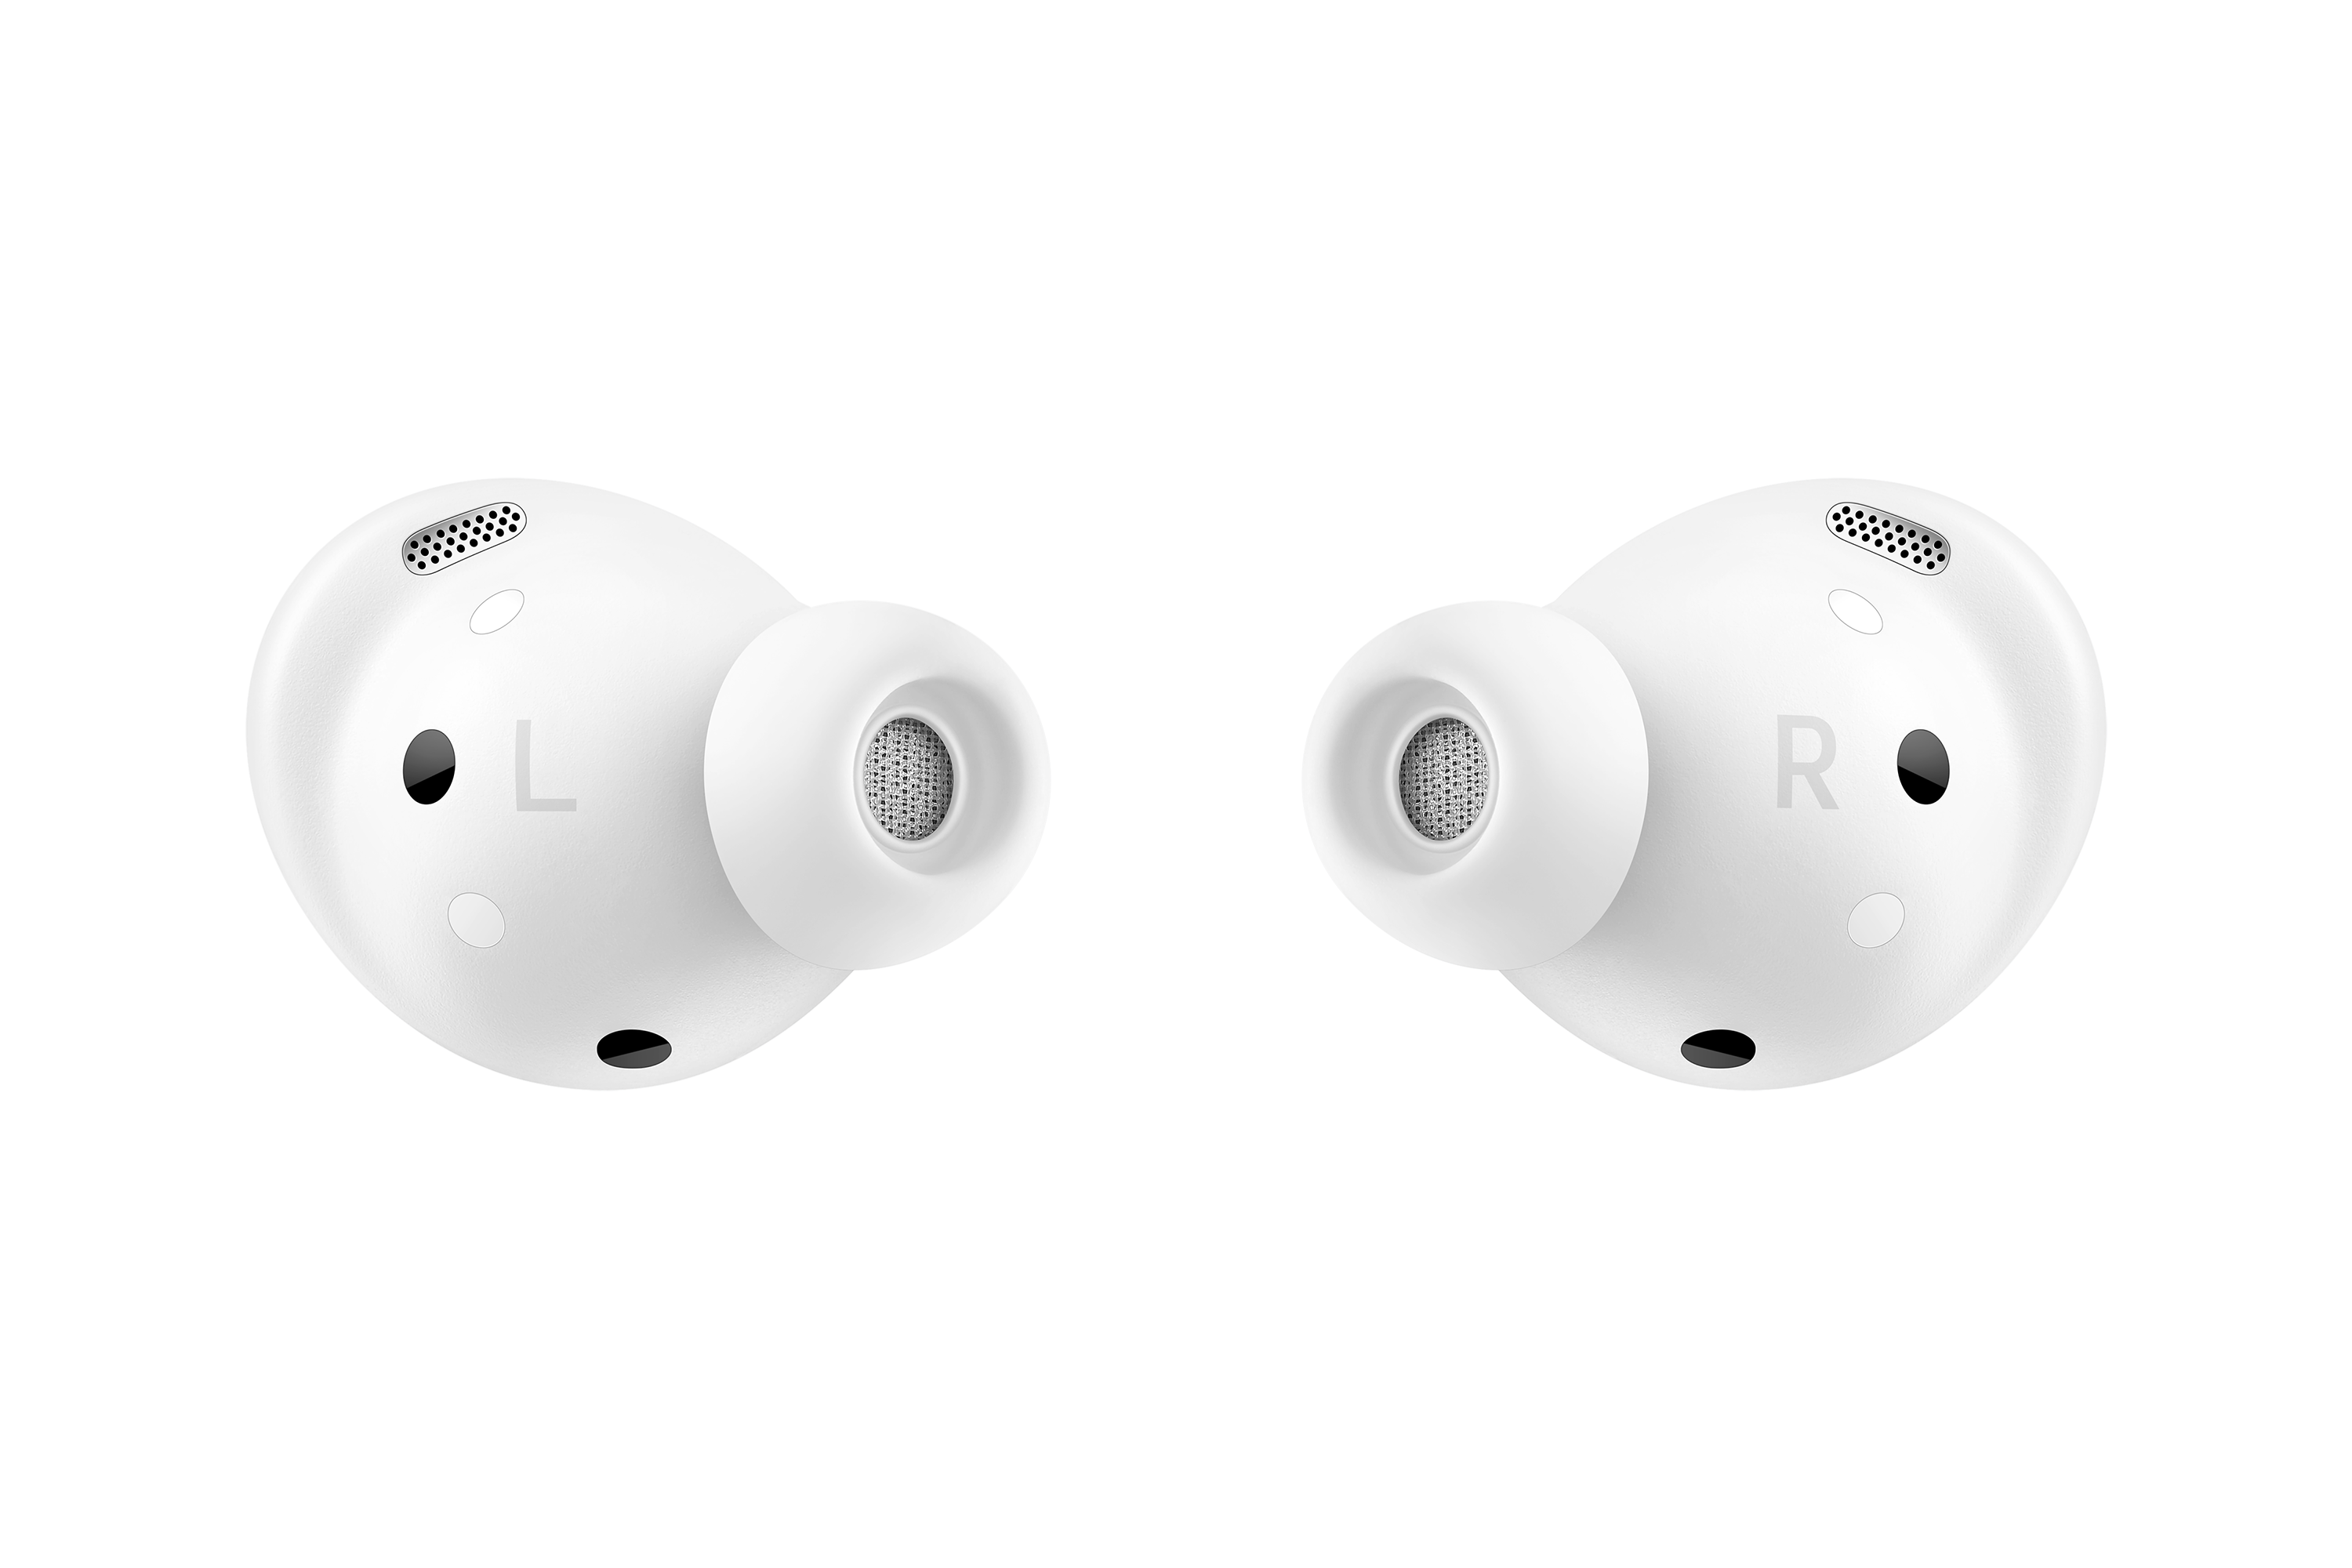 Galaxy Buds Pro now comes in an irresistible white color - Gizmochina